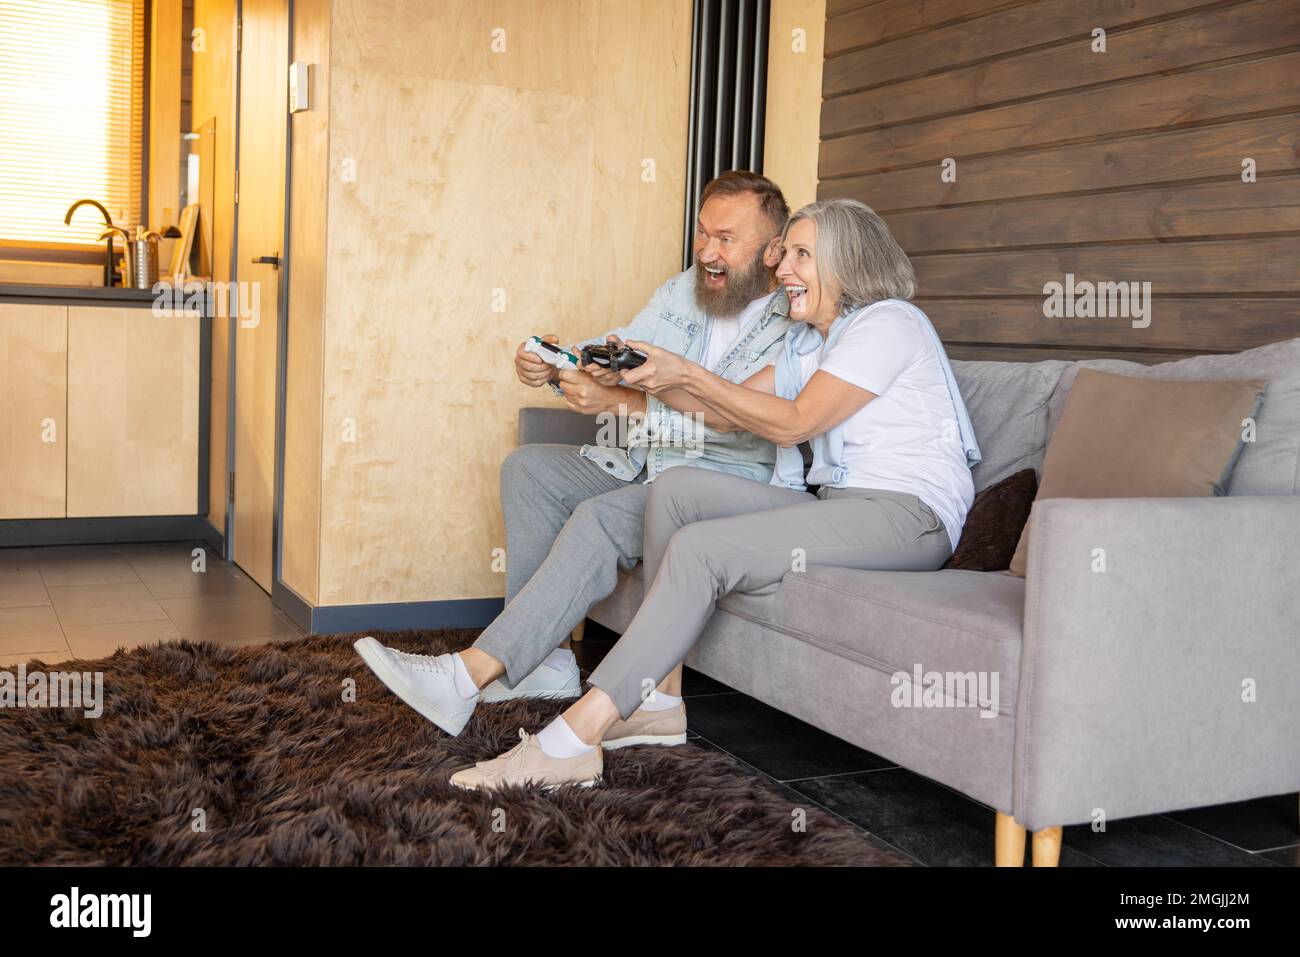 Mature couple playing video games and looking excited Stock Photo